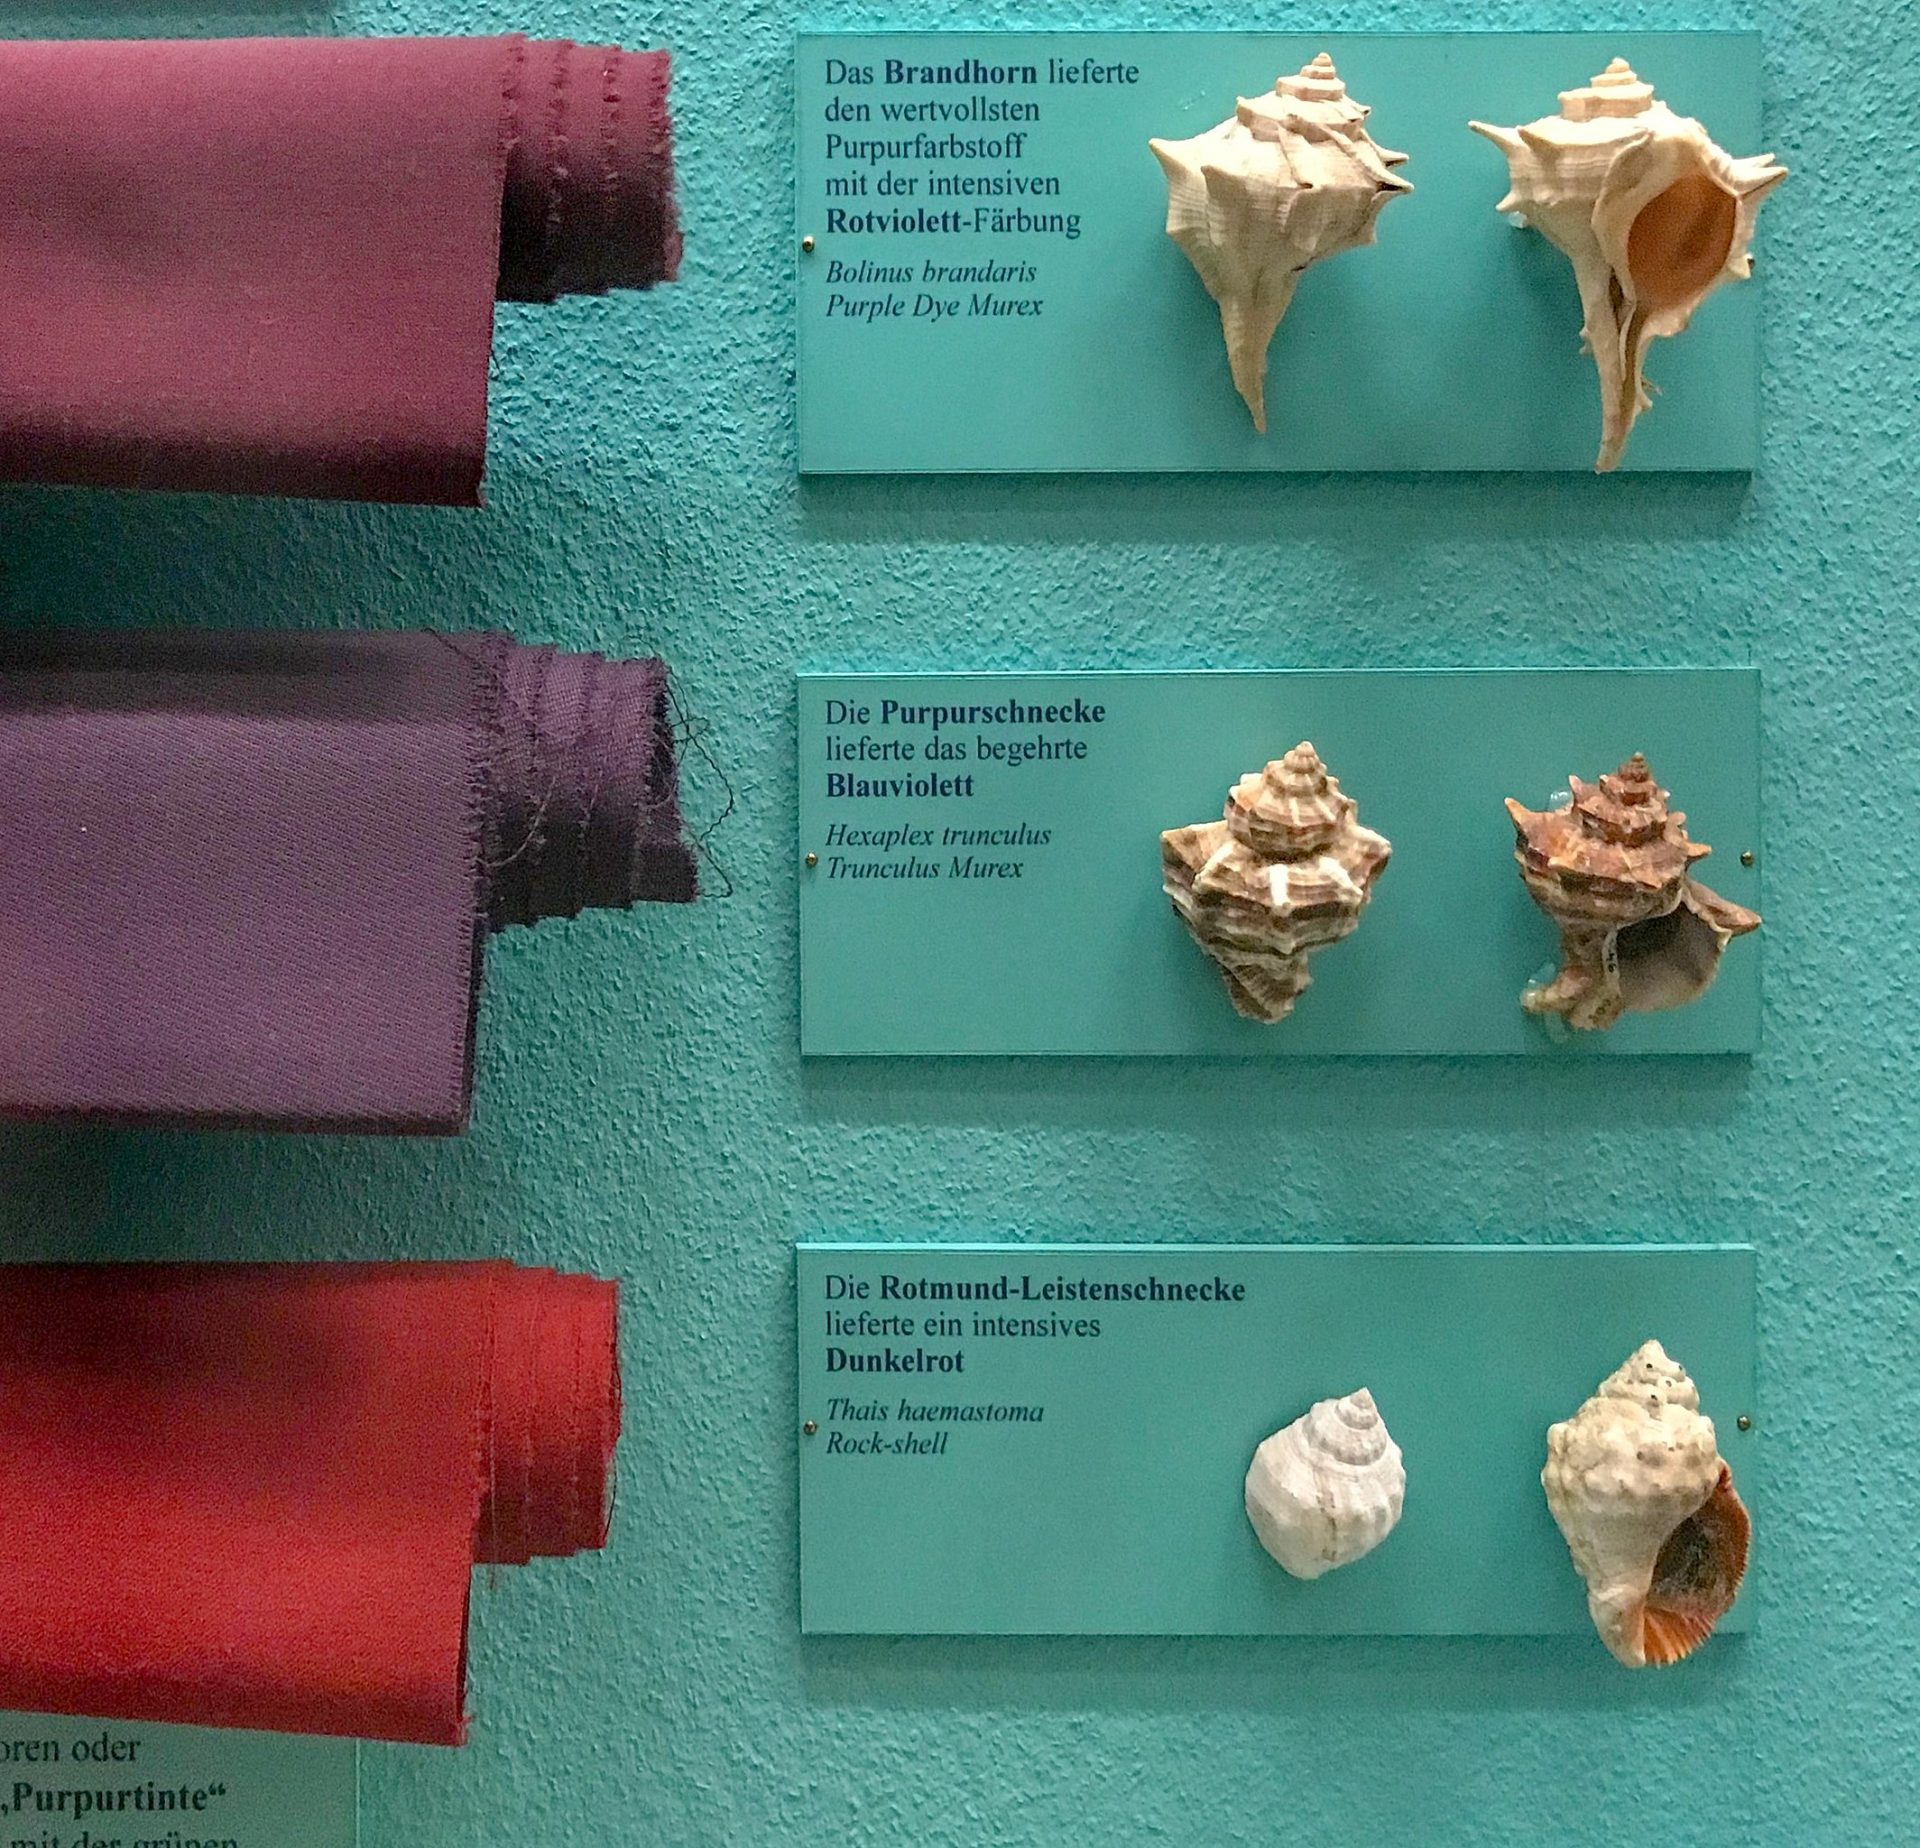 The image shows several different types of seashells displayed on a blue background. The shells vary in shapes and color. They are arranged in three rows of two shells. The shells are divided and labeled by type.